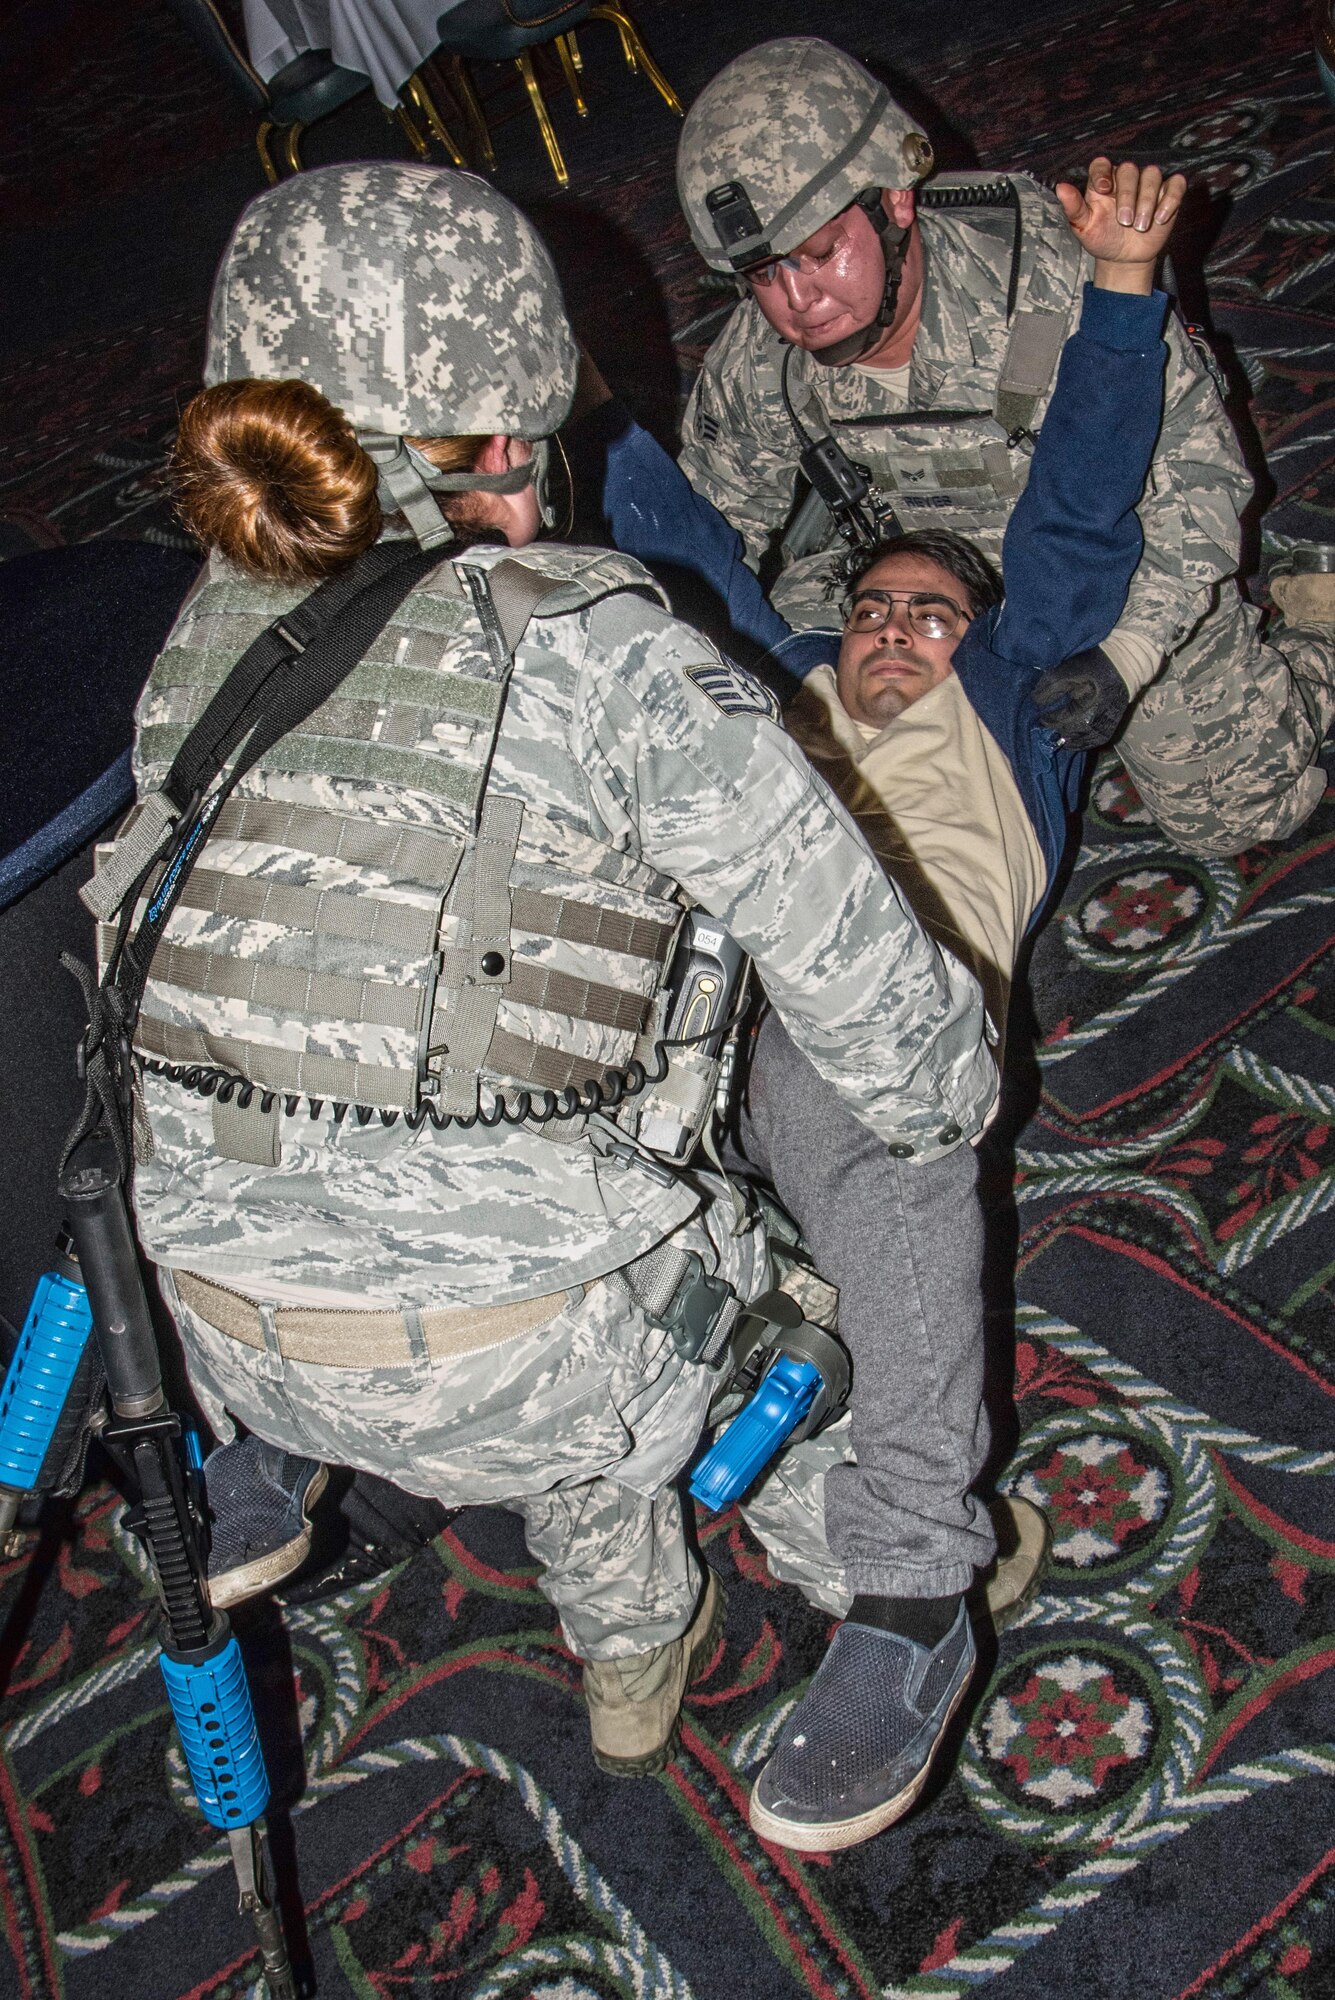 The 375th Security Forces Squadron work with the 375th Medical Group for an active shoort exercise. Medical group teams applied moulage to "victims" before the exercise started and placed them around the Scott Event Center before the exercise started. The exercise helped security forces personnel identify any short falls or limiting factors in respone capabilities and gave them a chance to test and train new tactics and procedues. It also afforded security forces the opportunity to train with the other first responders (fire department and medical) to ensure they can work cohesivley to neutralize the threat, secure the scene and treat victims and casualties as soon as possible. The overall goal is to be prepared to respond efficienty and effectively to minimize the loss of life in the event of an active shooter.(U.S. Air Force photos/Senior Airman Tristin English)